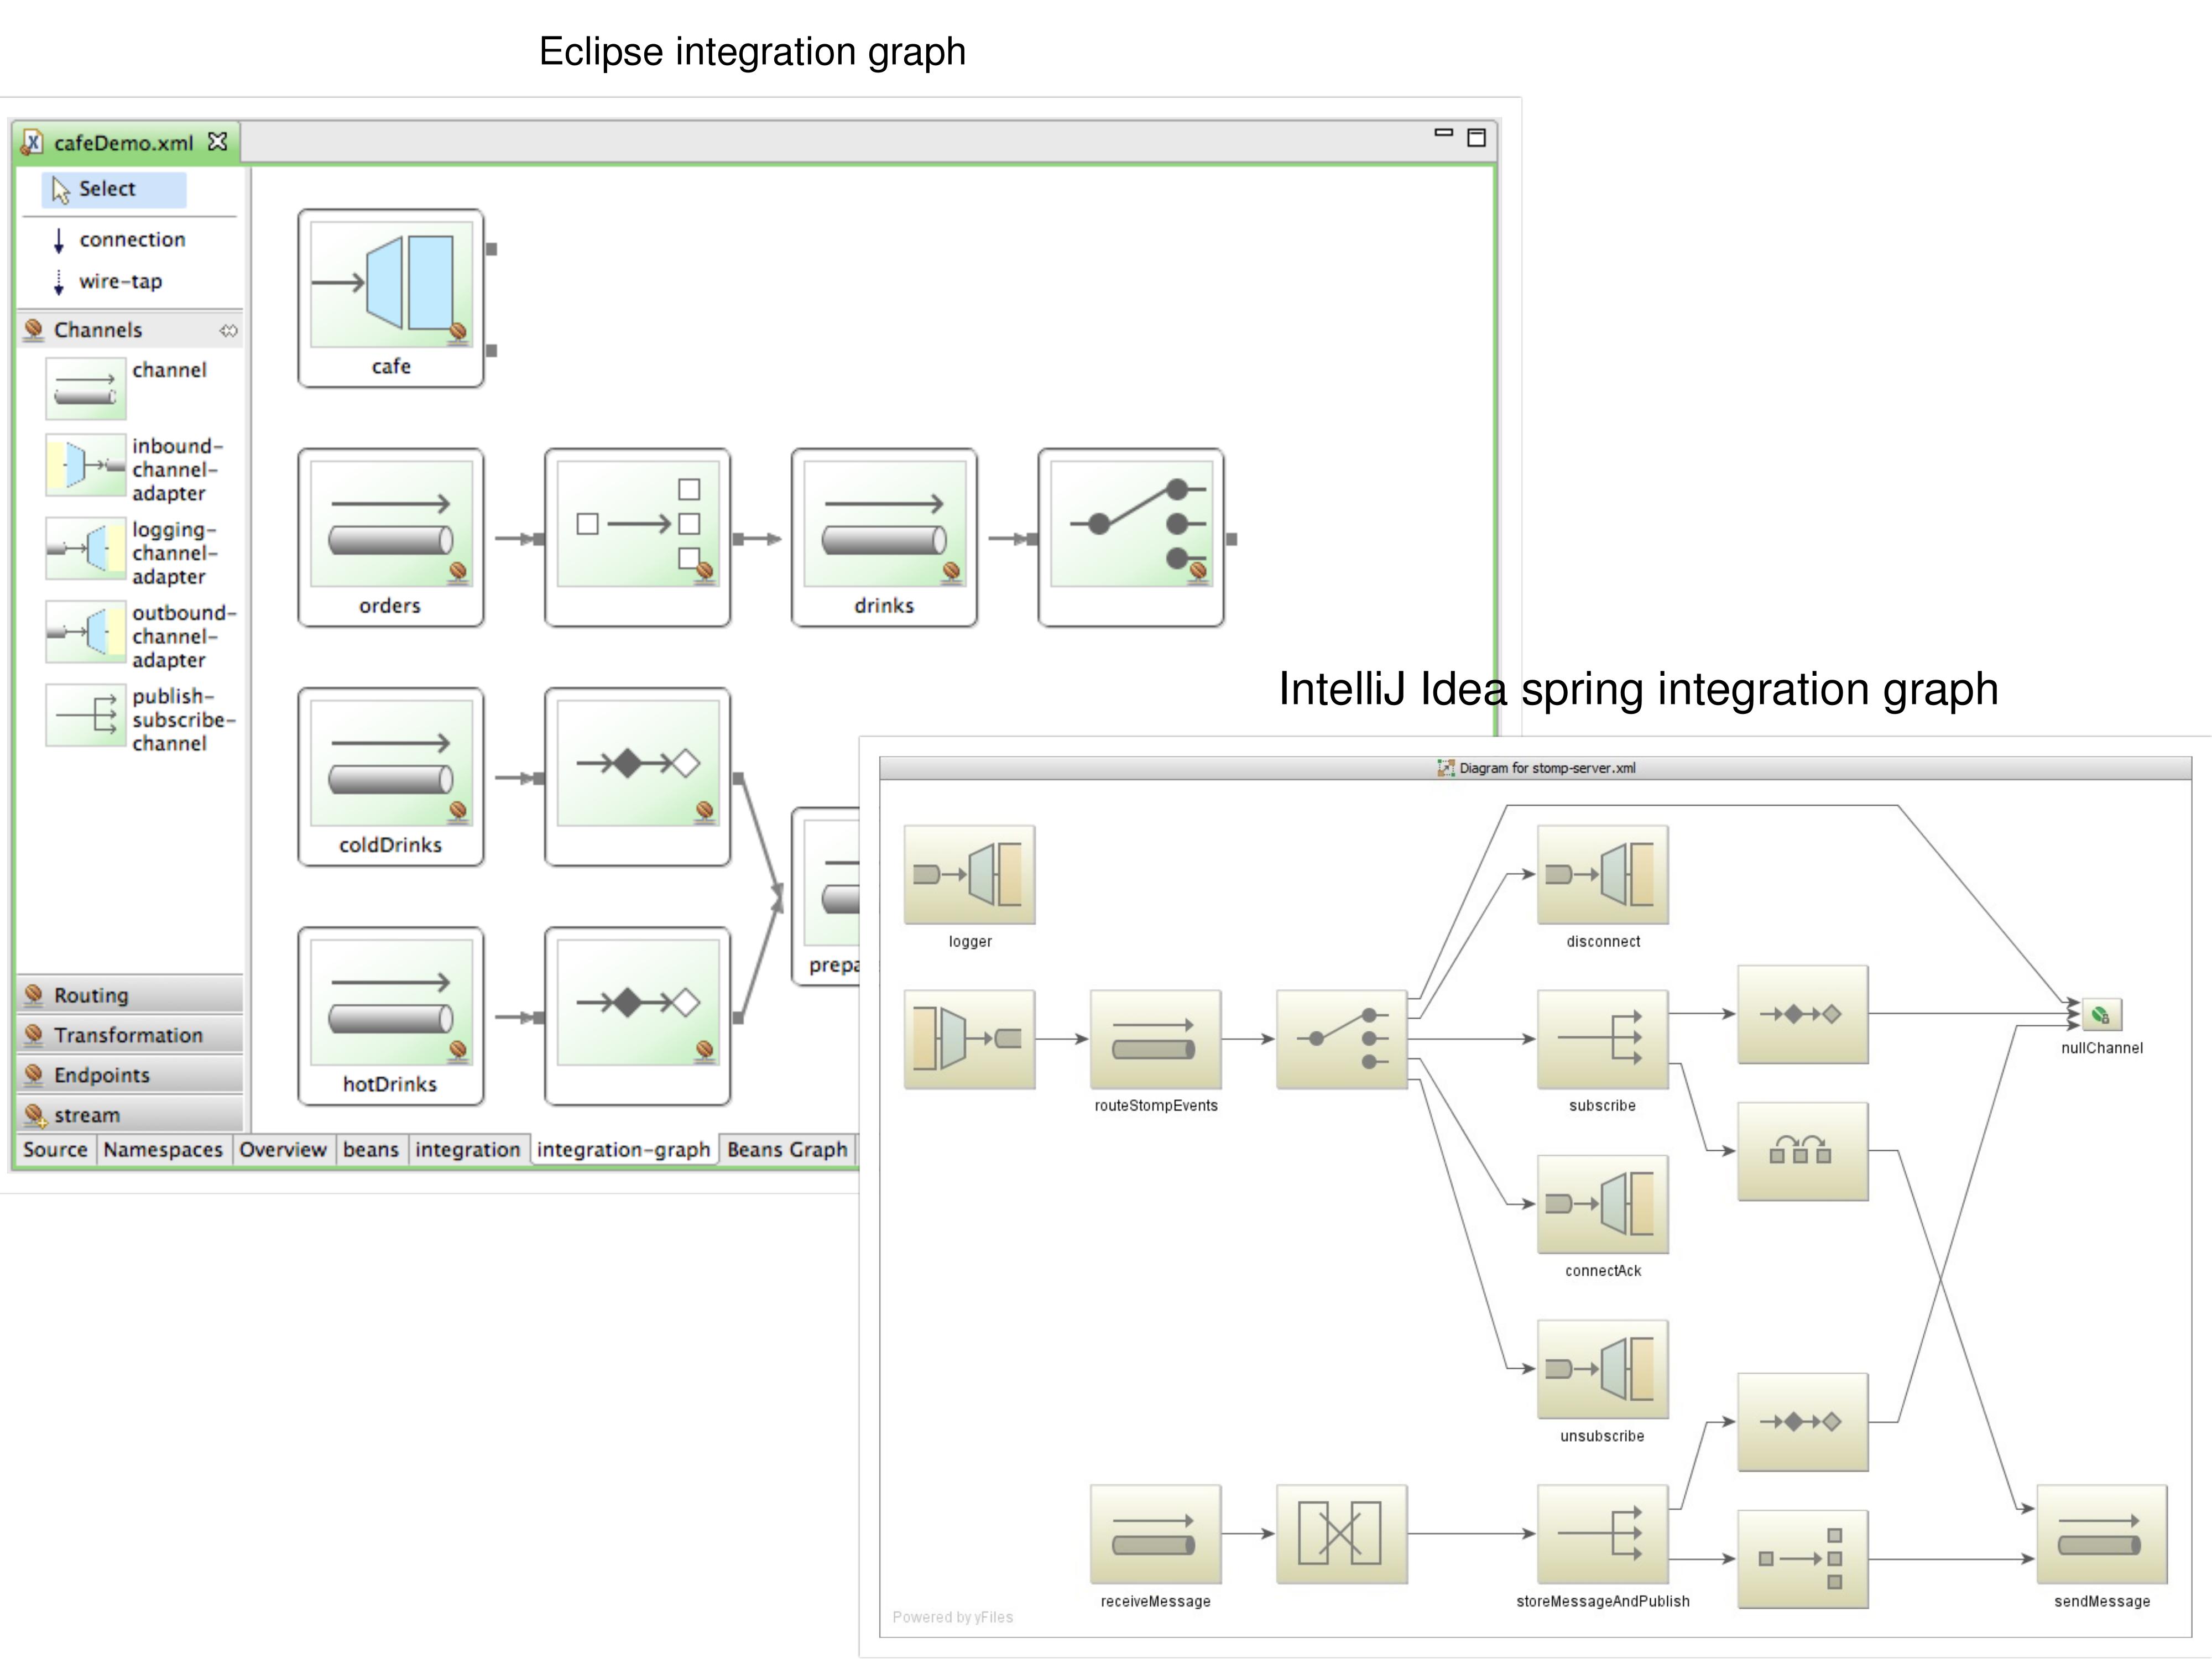 Integration flow graphs for spring-integration project in Eclipse and IntelliJ IDEA IDE's